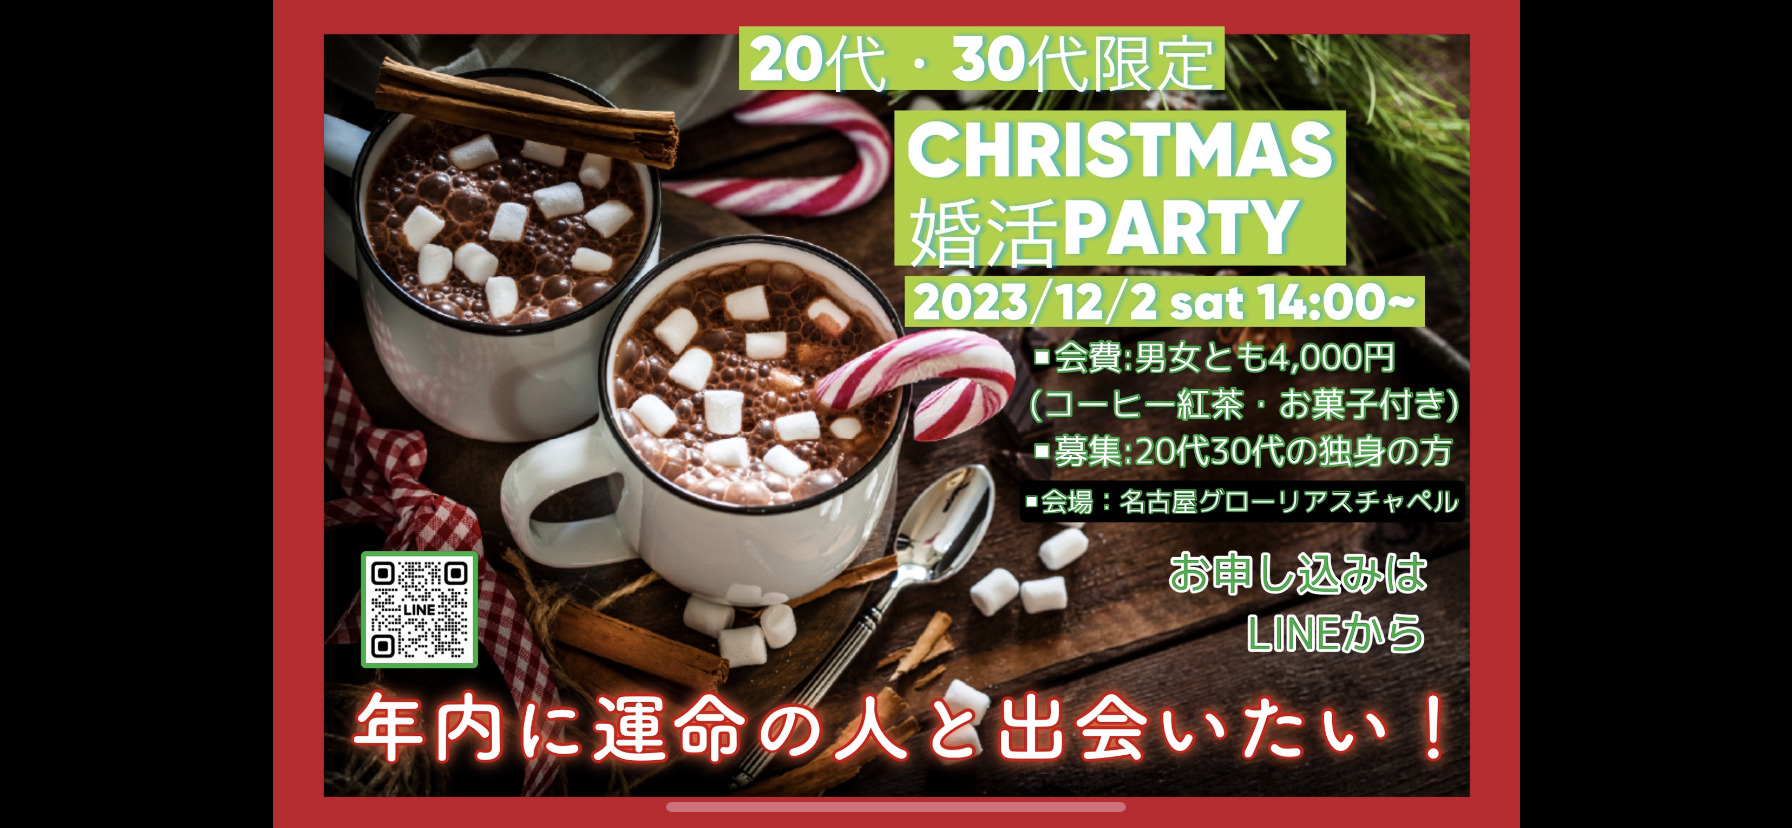 CHRISTMAS 婚活PARTY＠天白